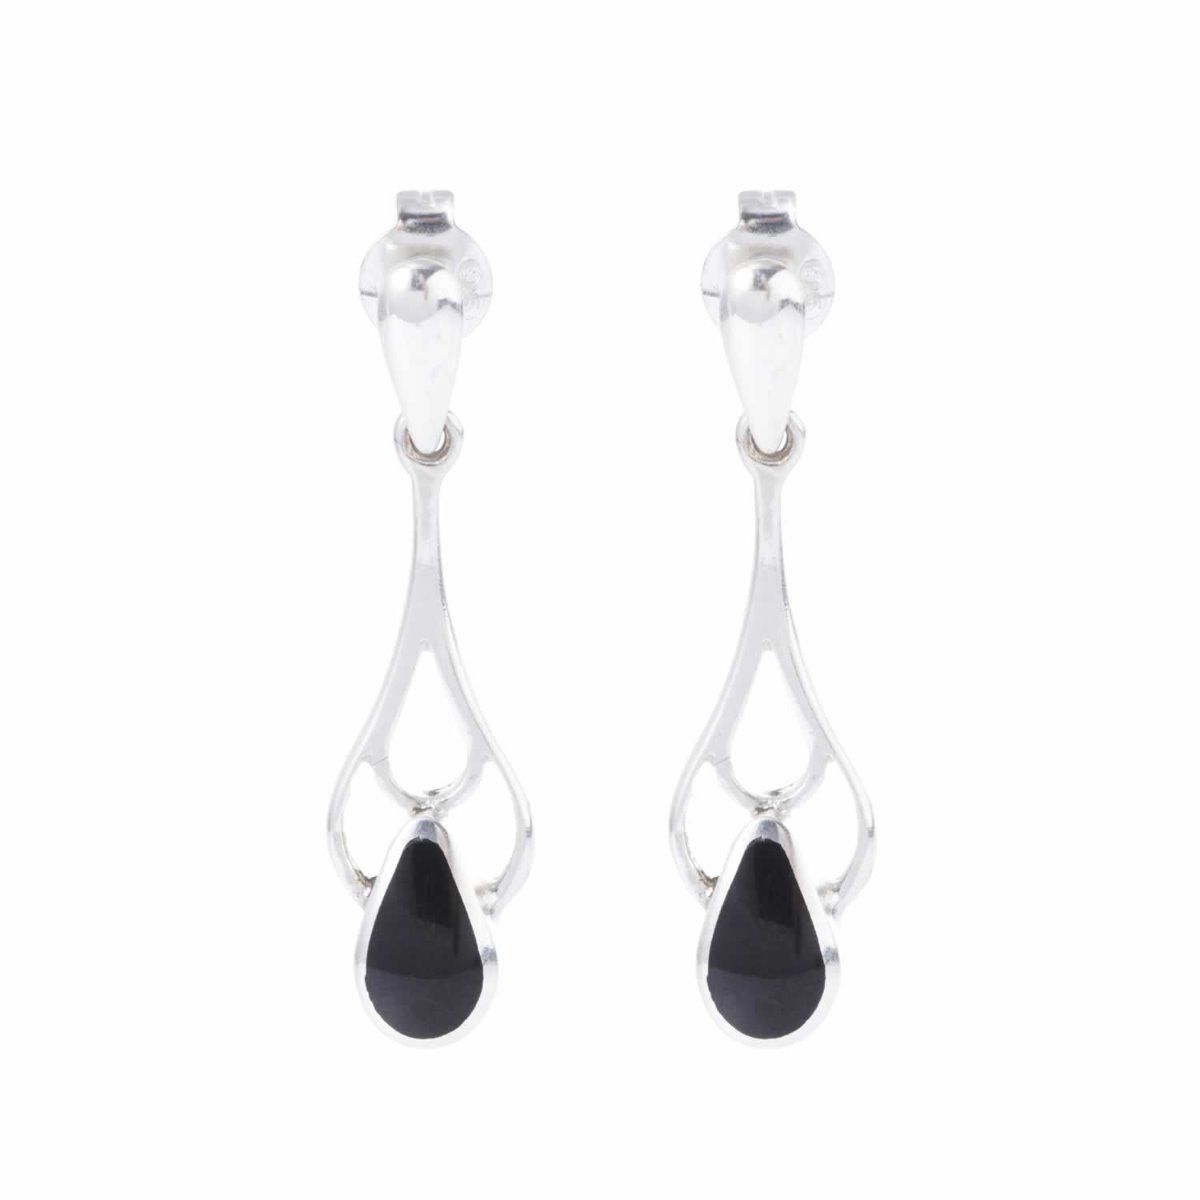 Whitby Jet and Sterling Silver Teardrop Ear Rings | english-heritage.org.uk